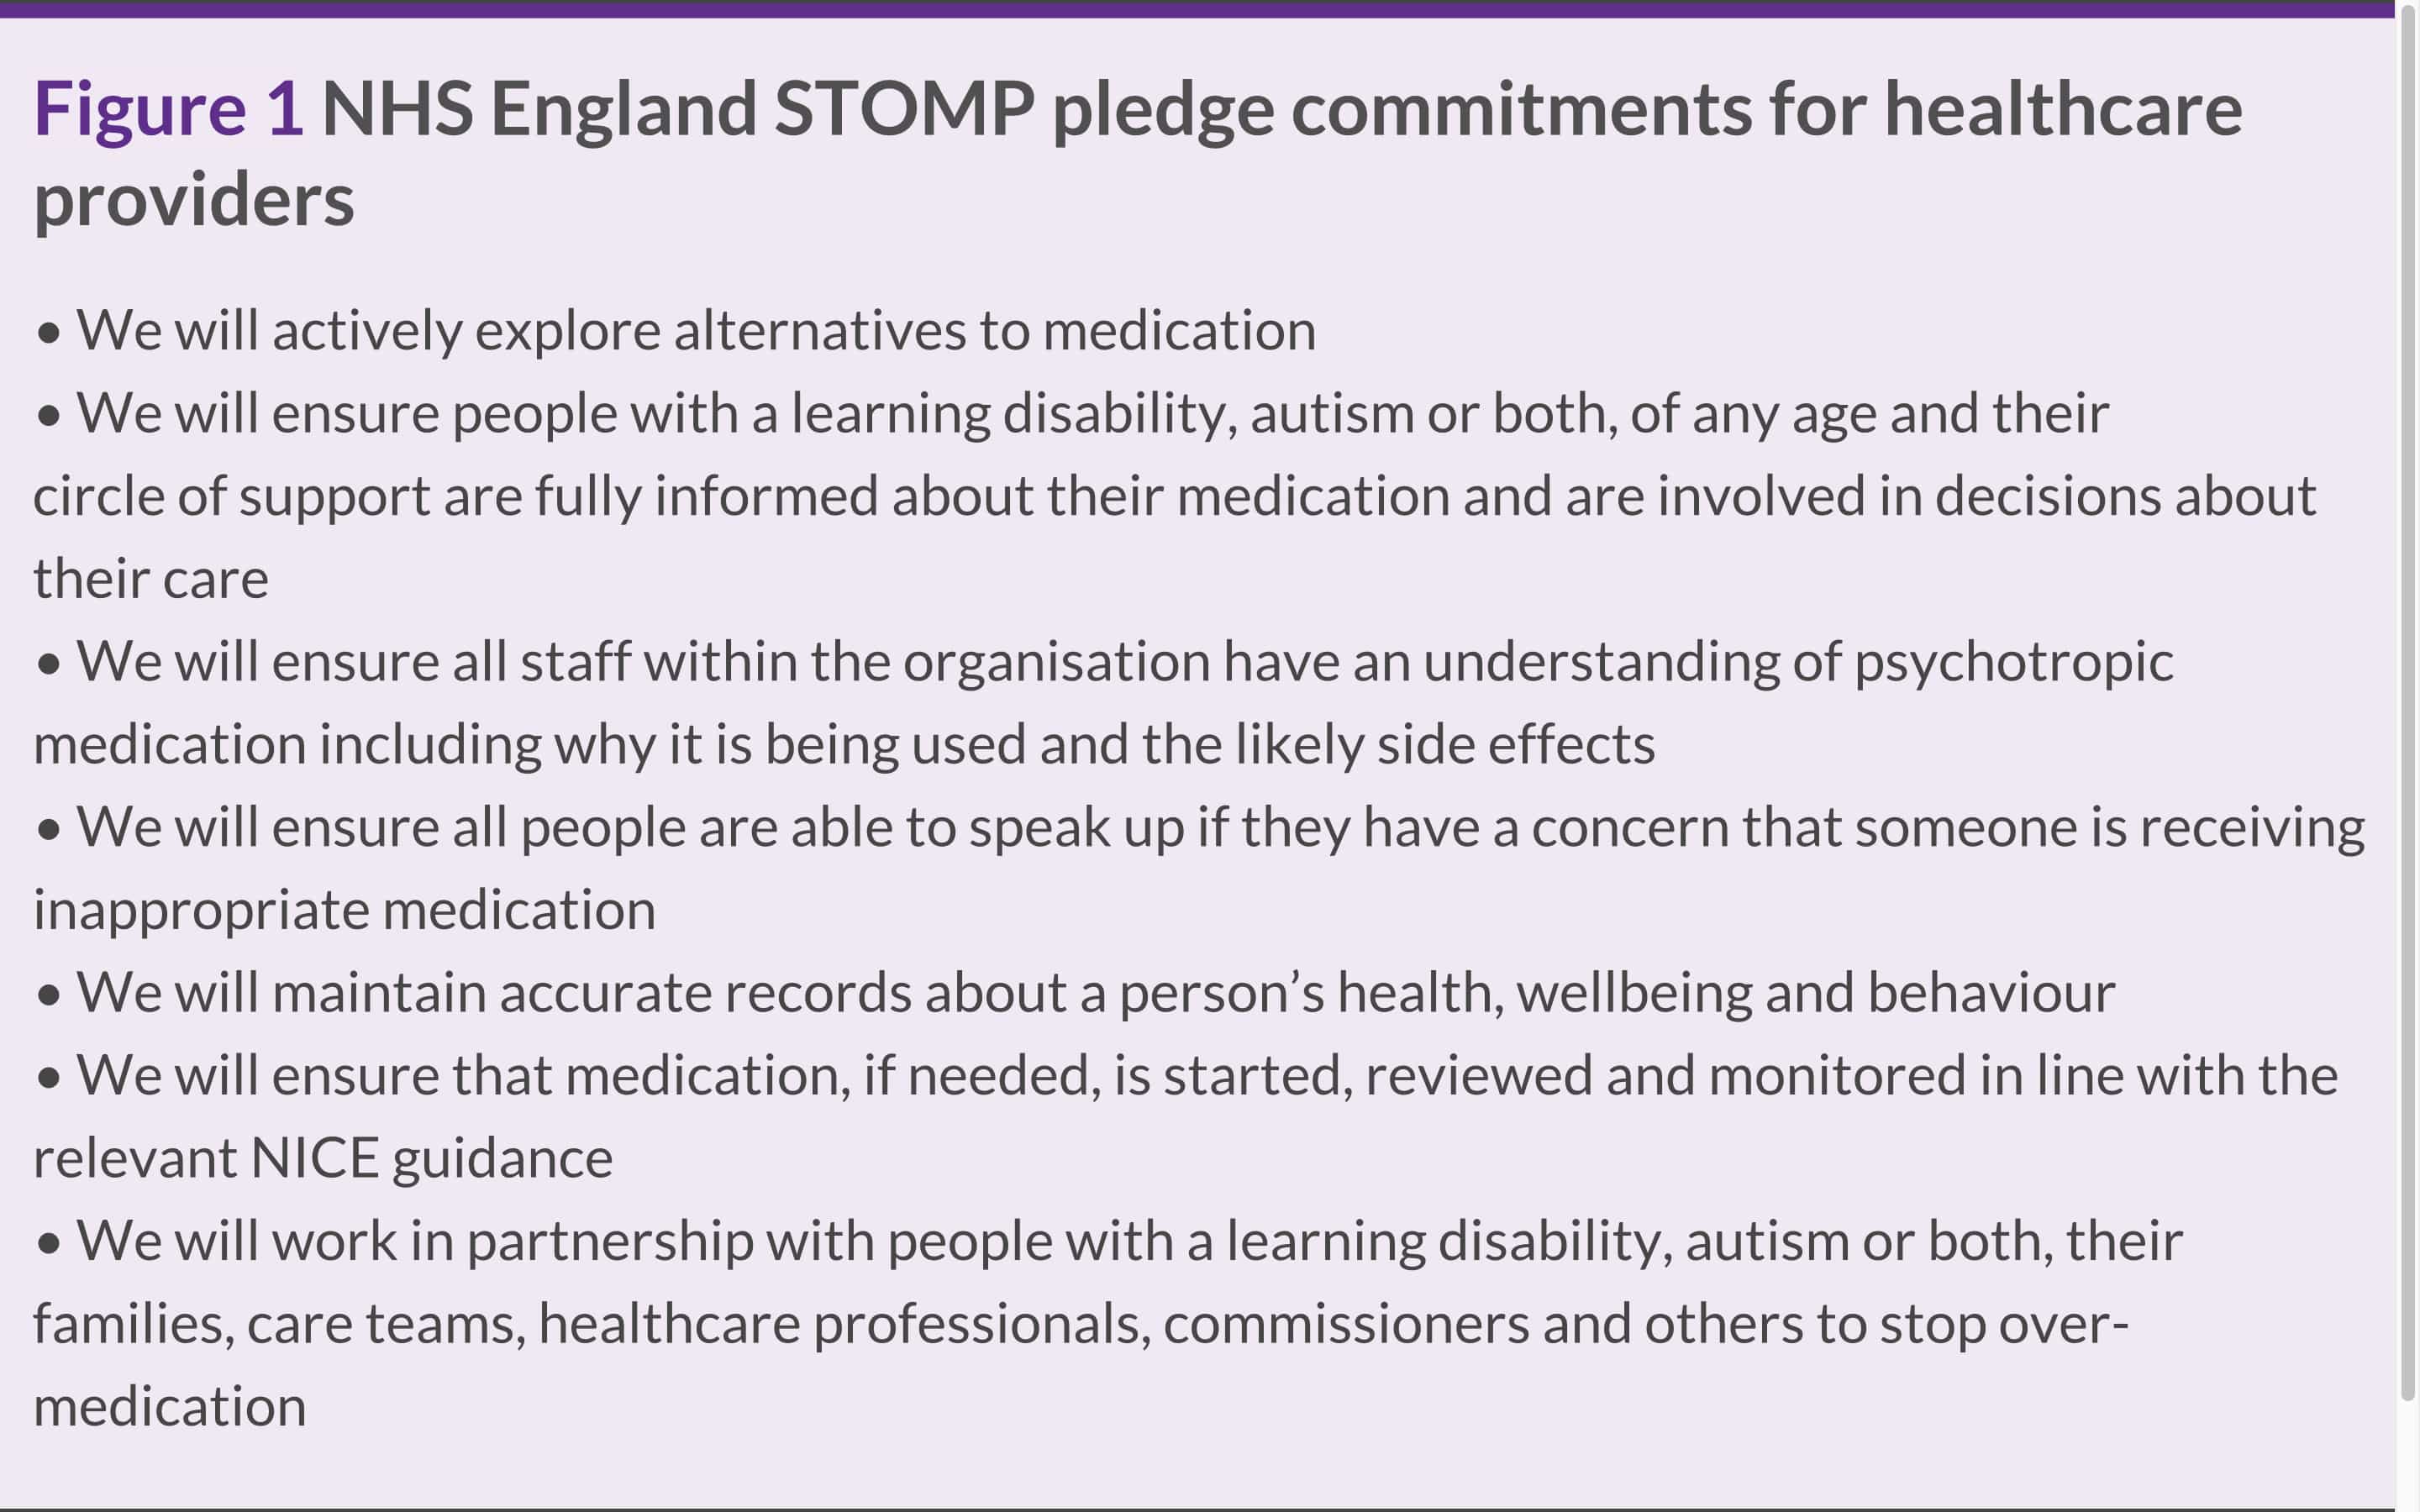 NHS England pledge commitments for healthcare providers on stopping the over medication of people with a learning disability or autism.